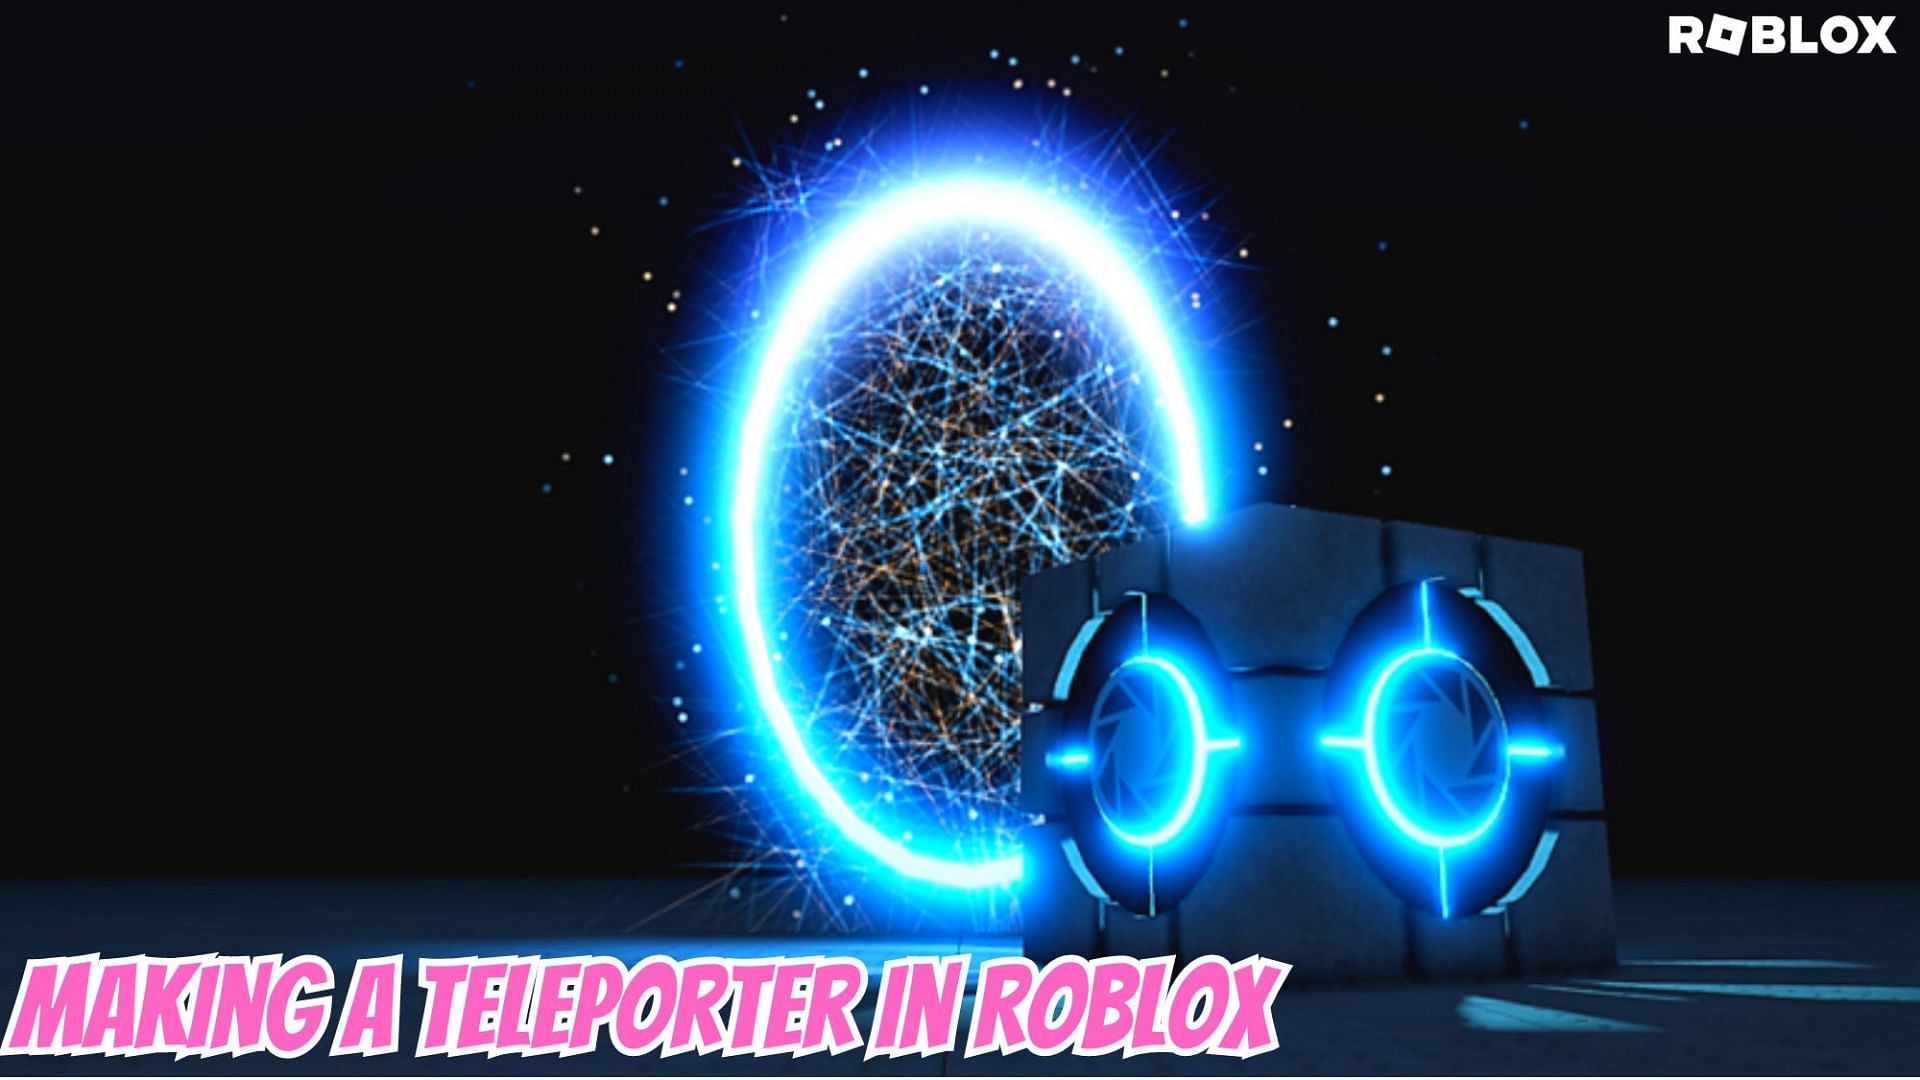 Game teleports you into Loading? - Scripting Support - Developer Forum